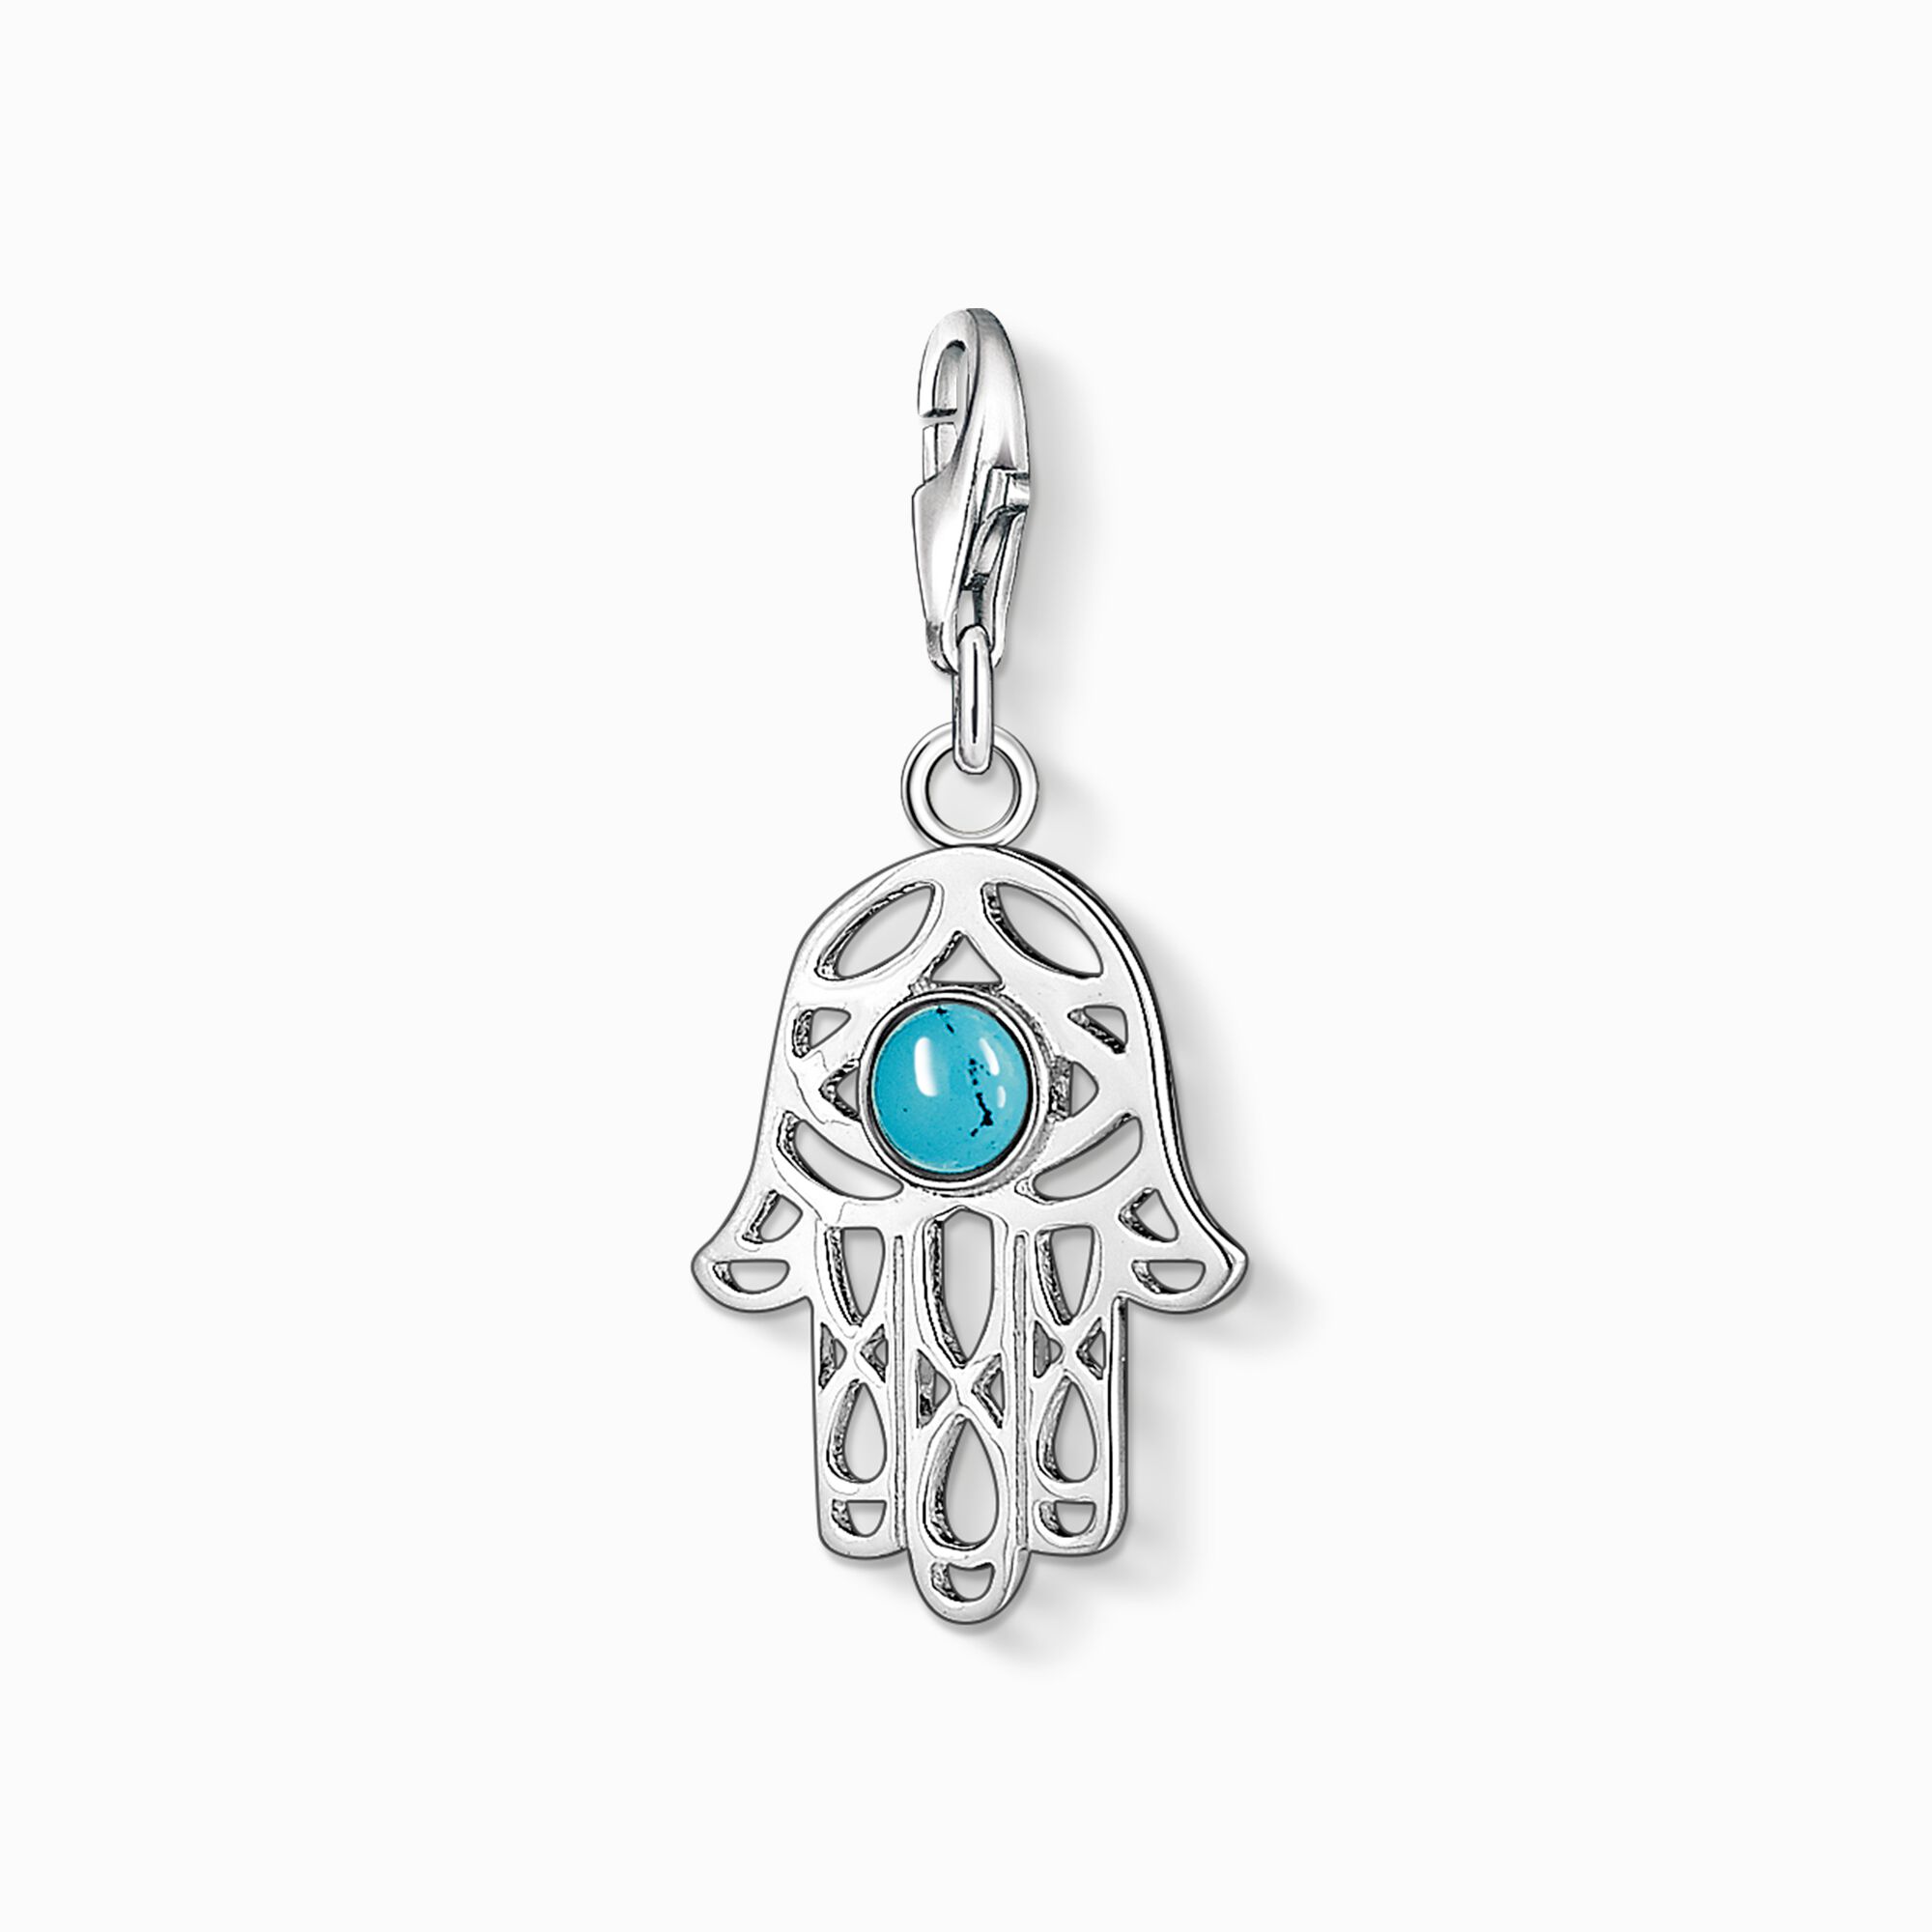 Charm pendant Hand of Fatima from the Charm Club collection in the THOMAS SABO online store